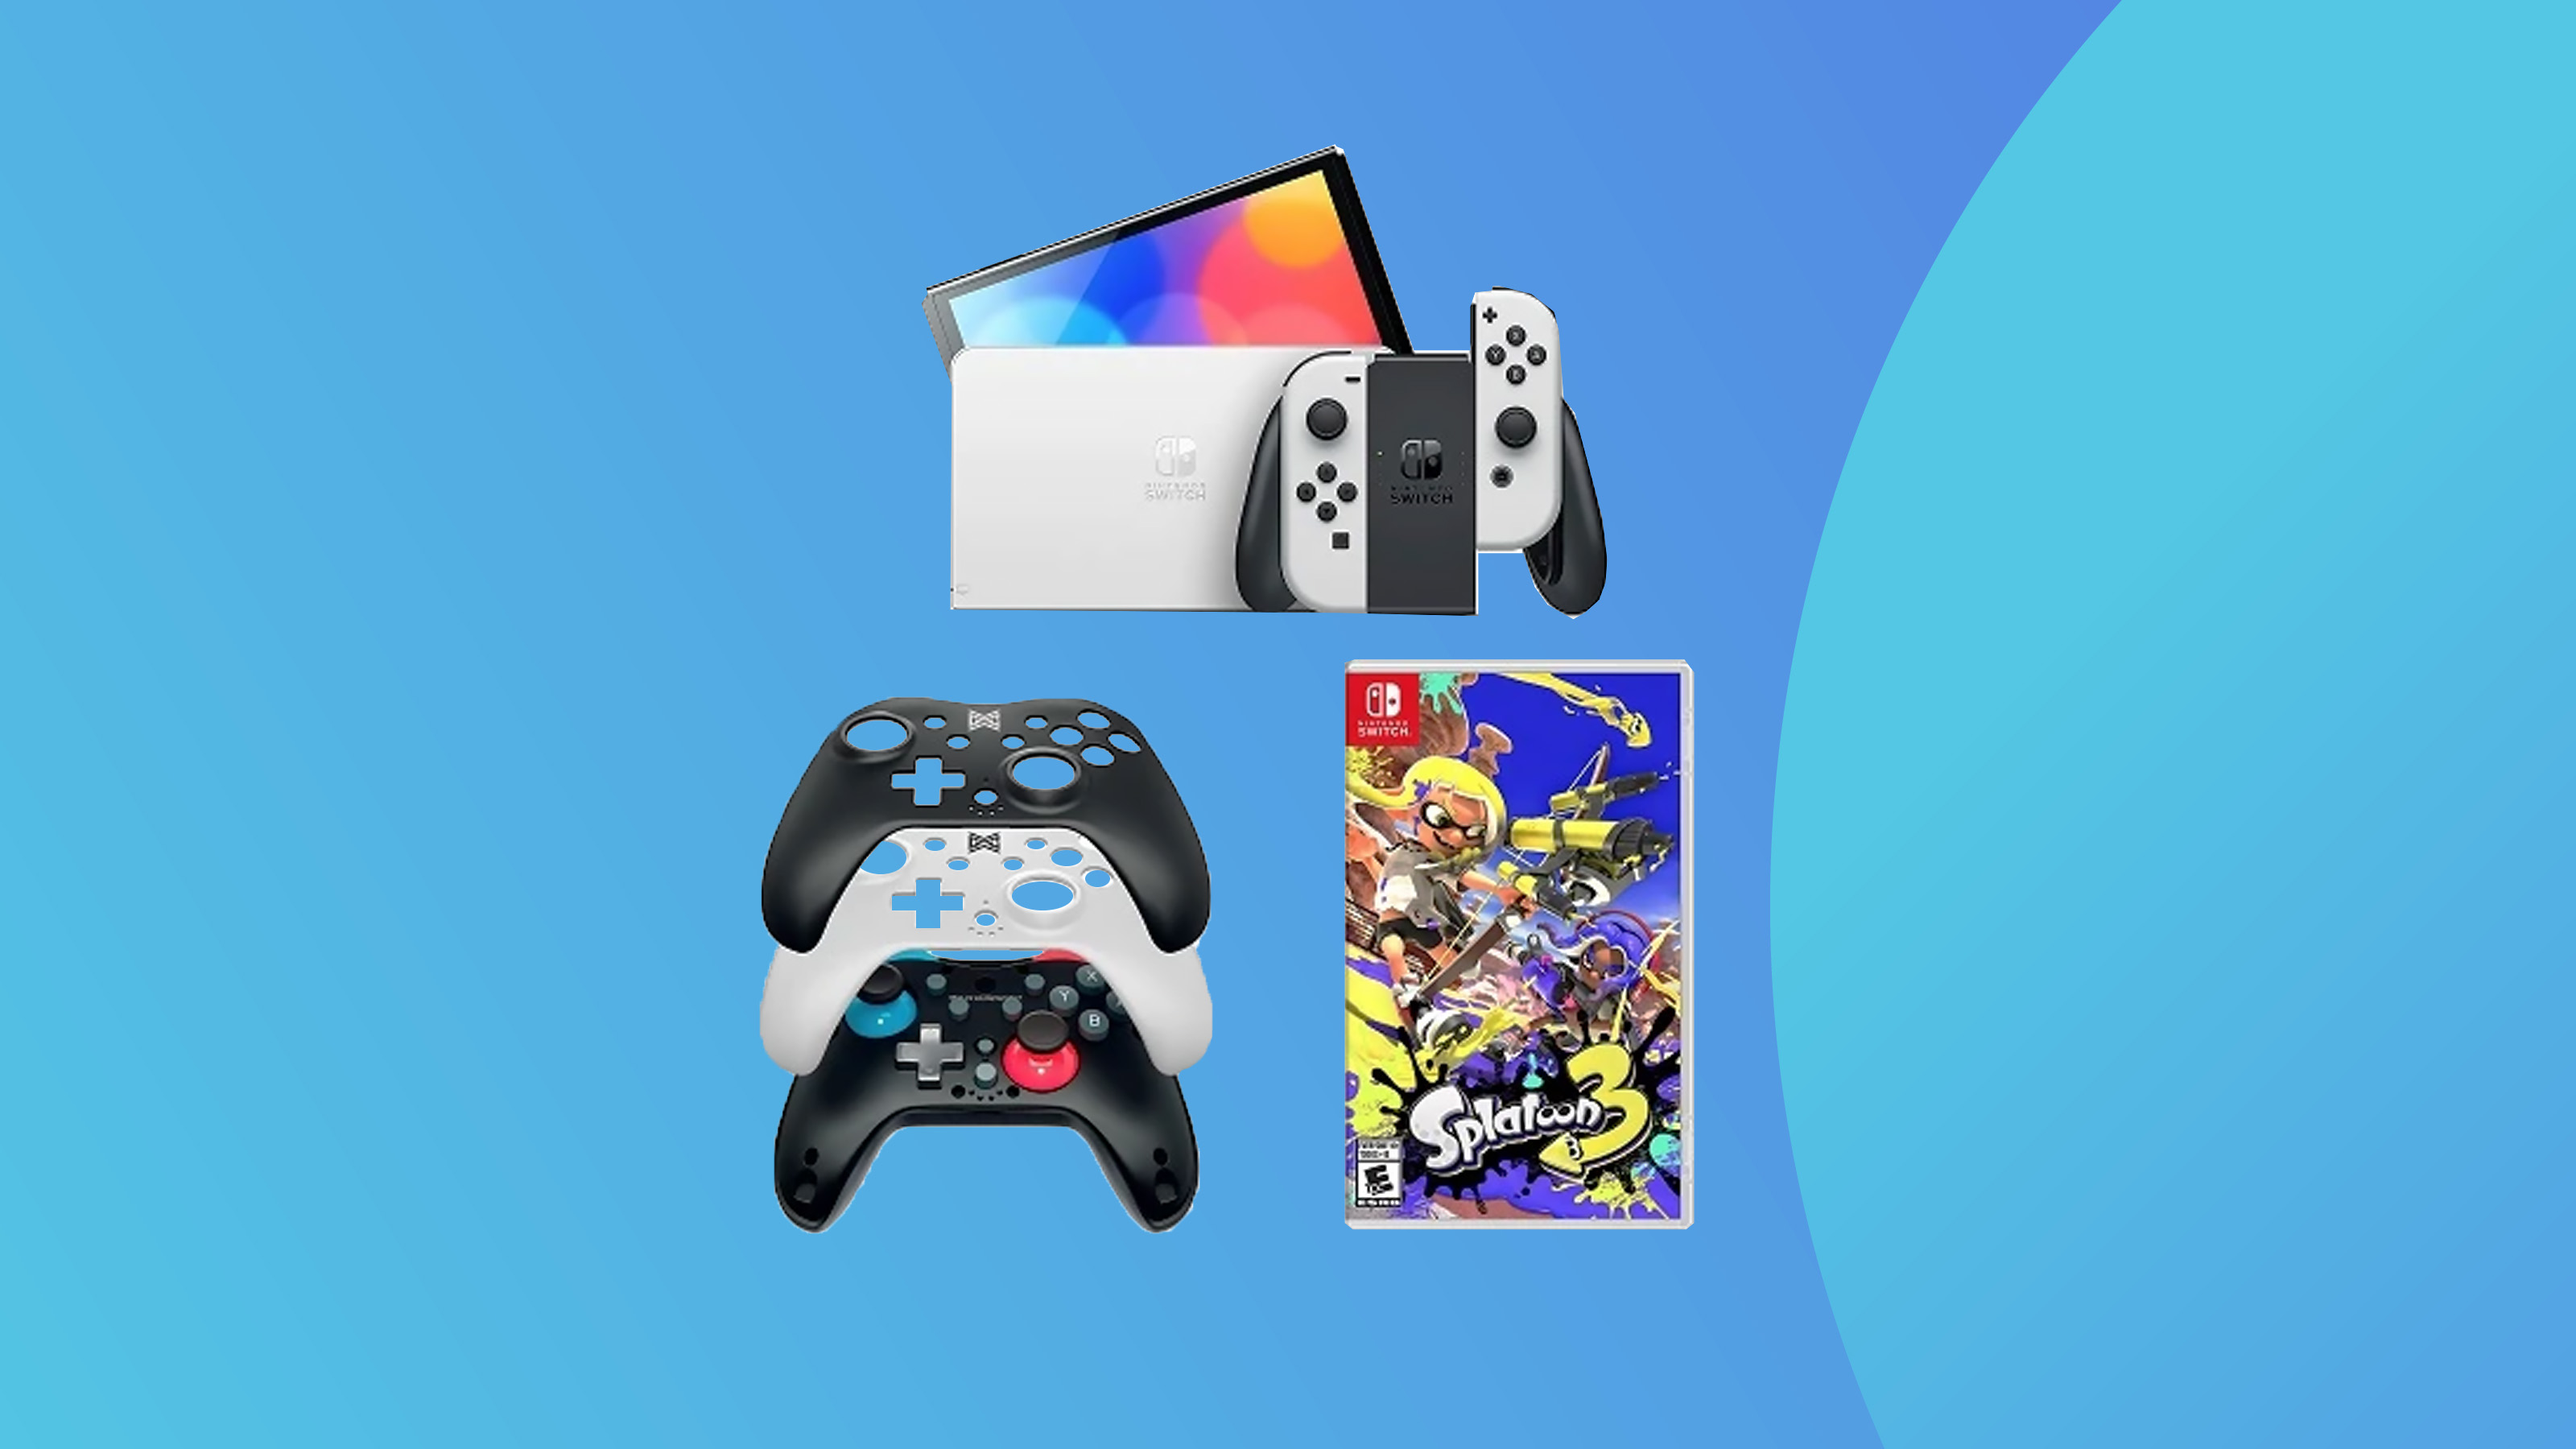 Product shot of the Switch Oled and accessories on a colorful background